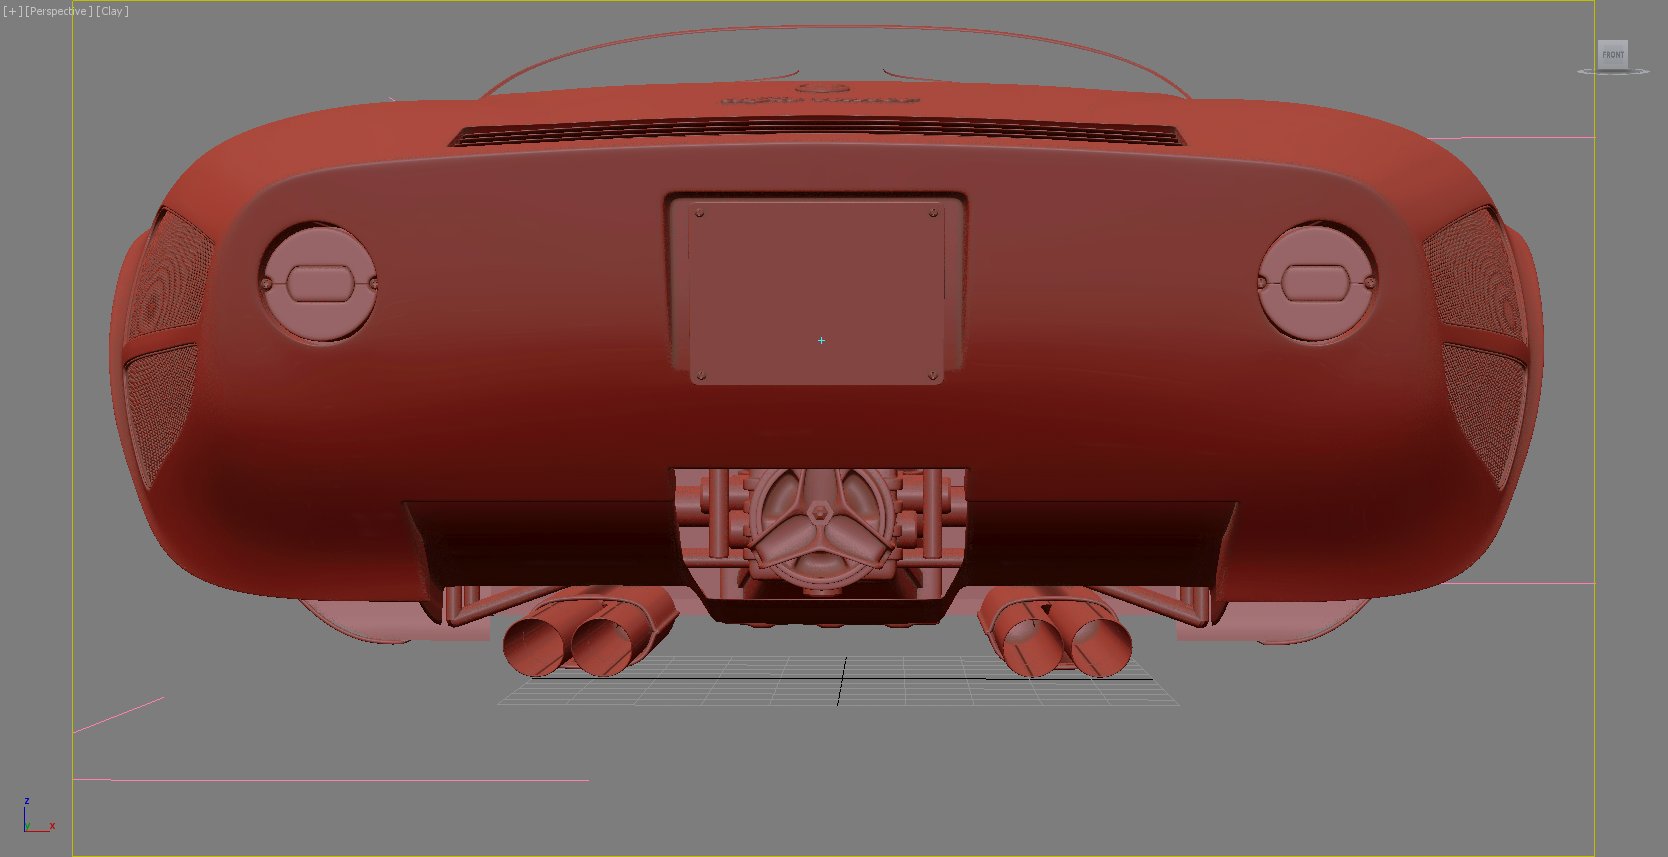 WIP Concours d’Elegance